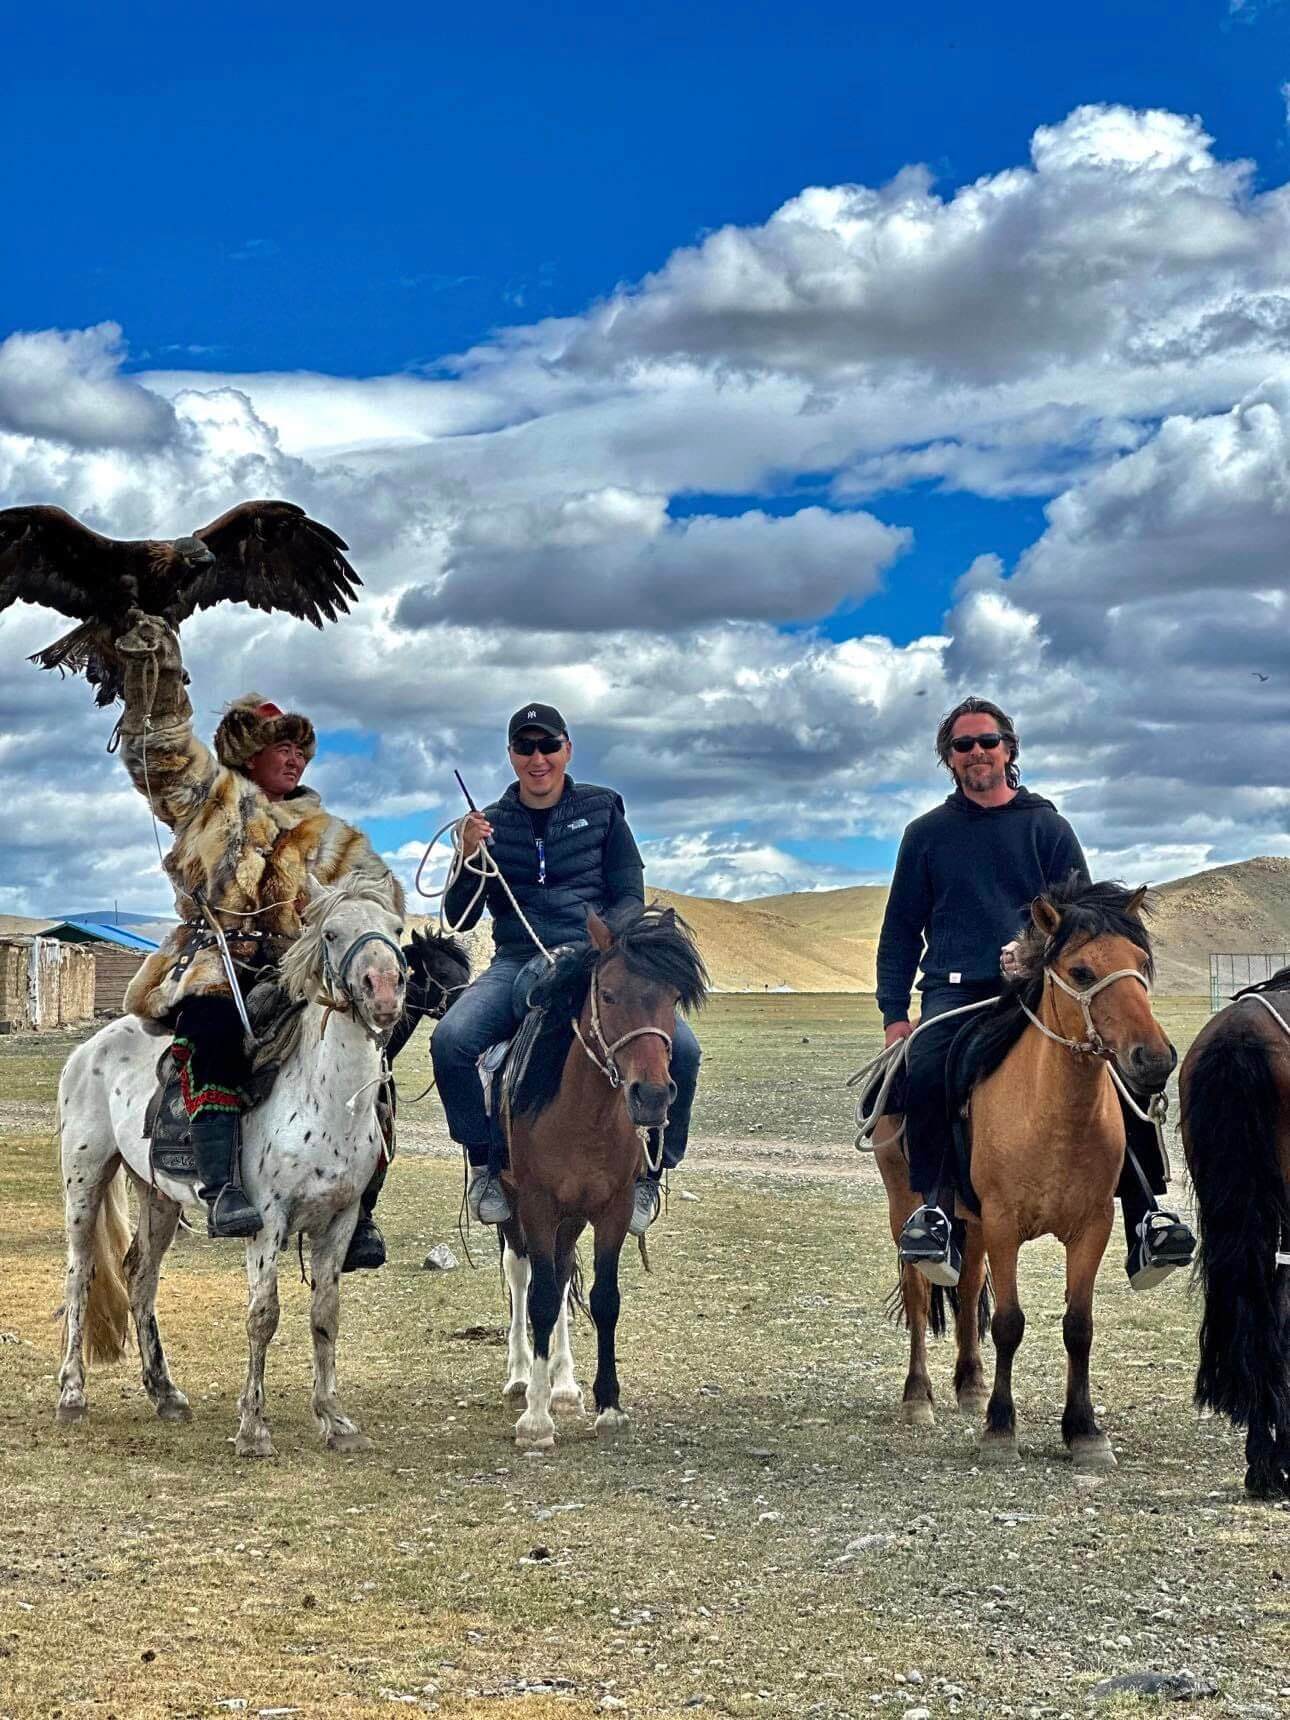 Our history with Christian Bale in Mongolia to visit Mongolian